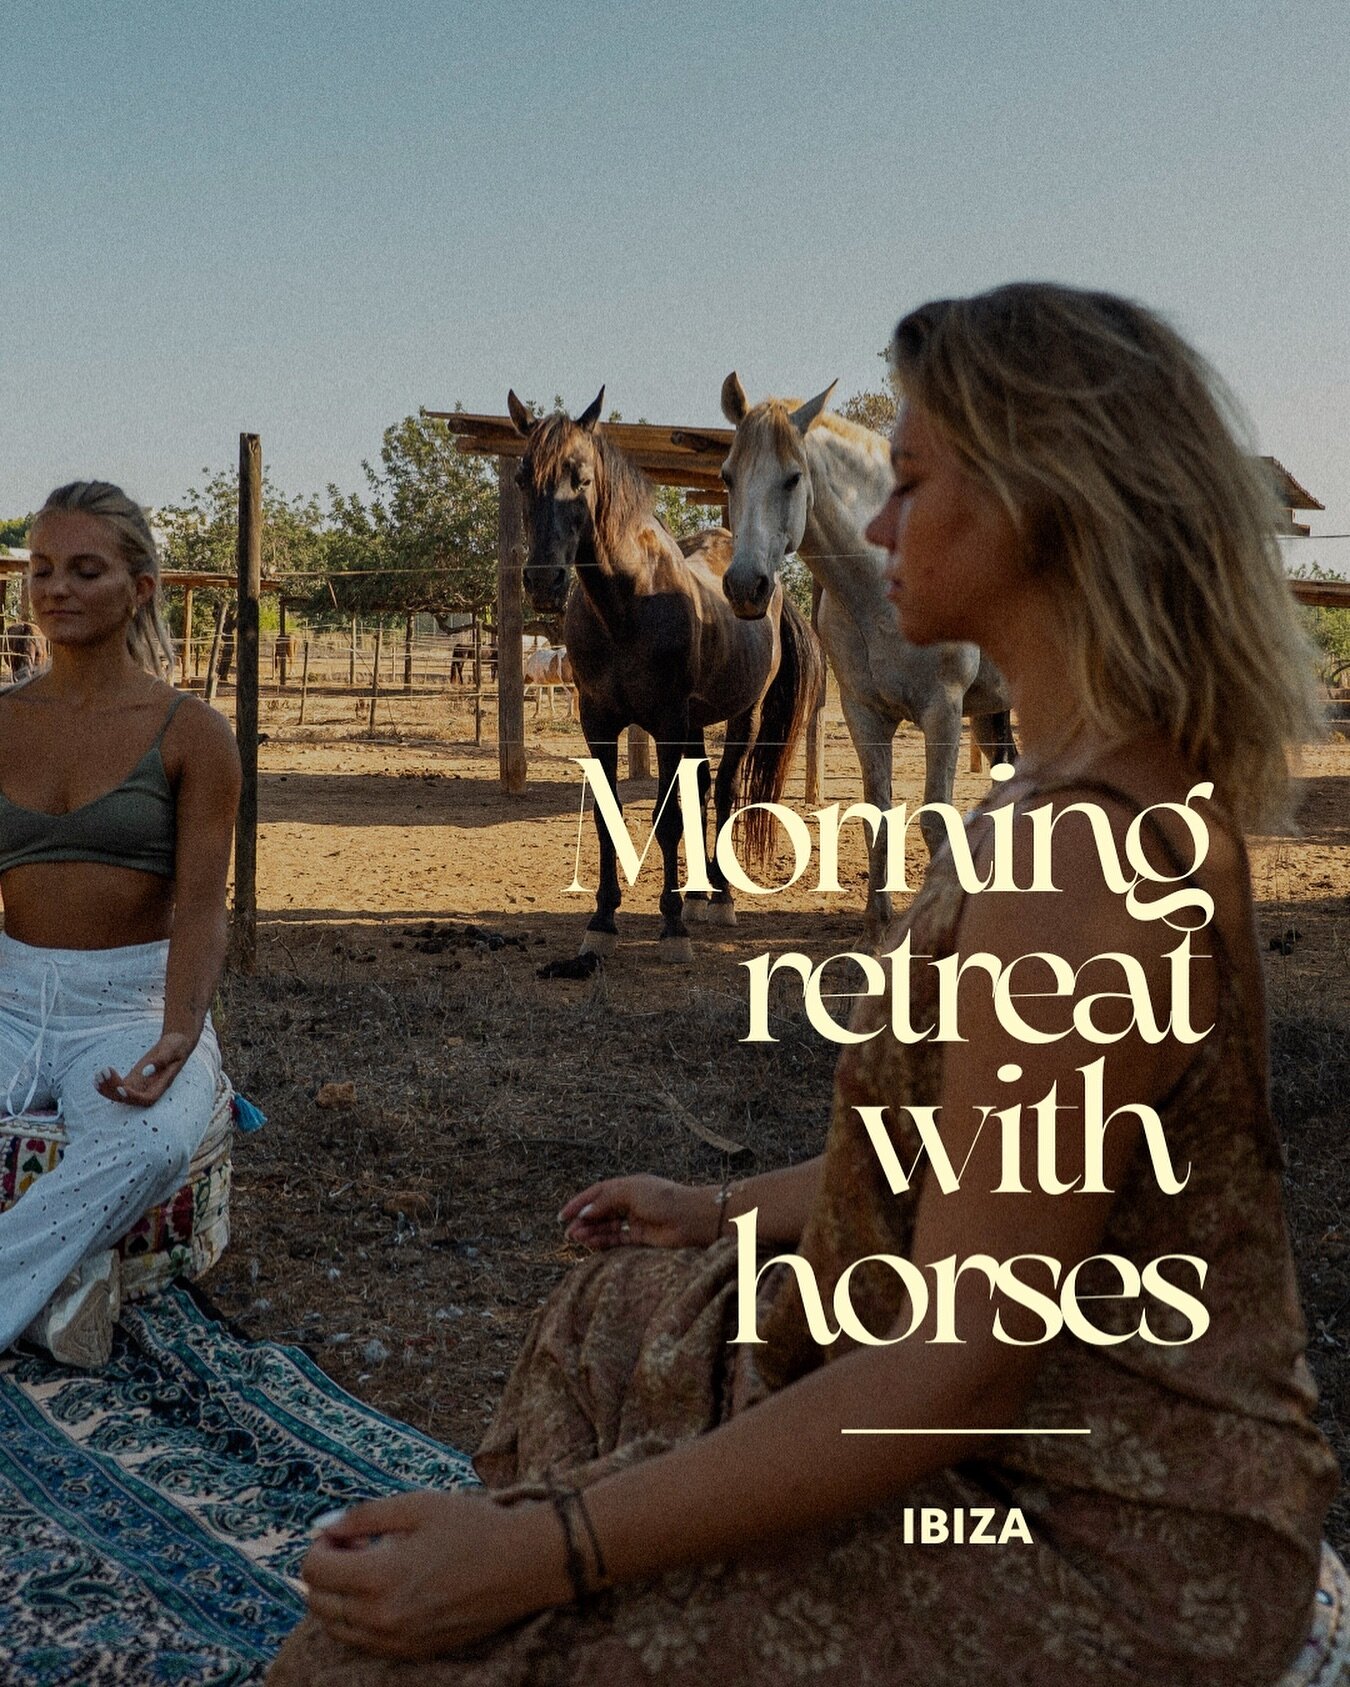 Join the Morning Retreat with horse coaching on Easter Monday for your personal growth! 🌿✨

(No experience with horses is needed. It&rsquo;s all from the ground.)

🐴 The horse is the most powerful coach you will ever meet. She will show you how you